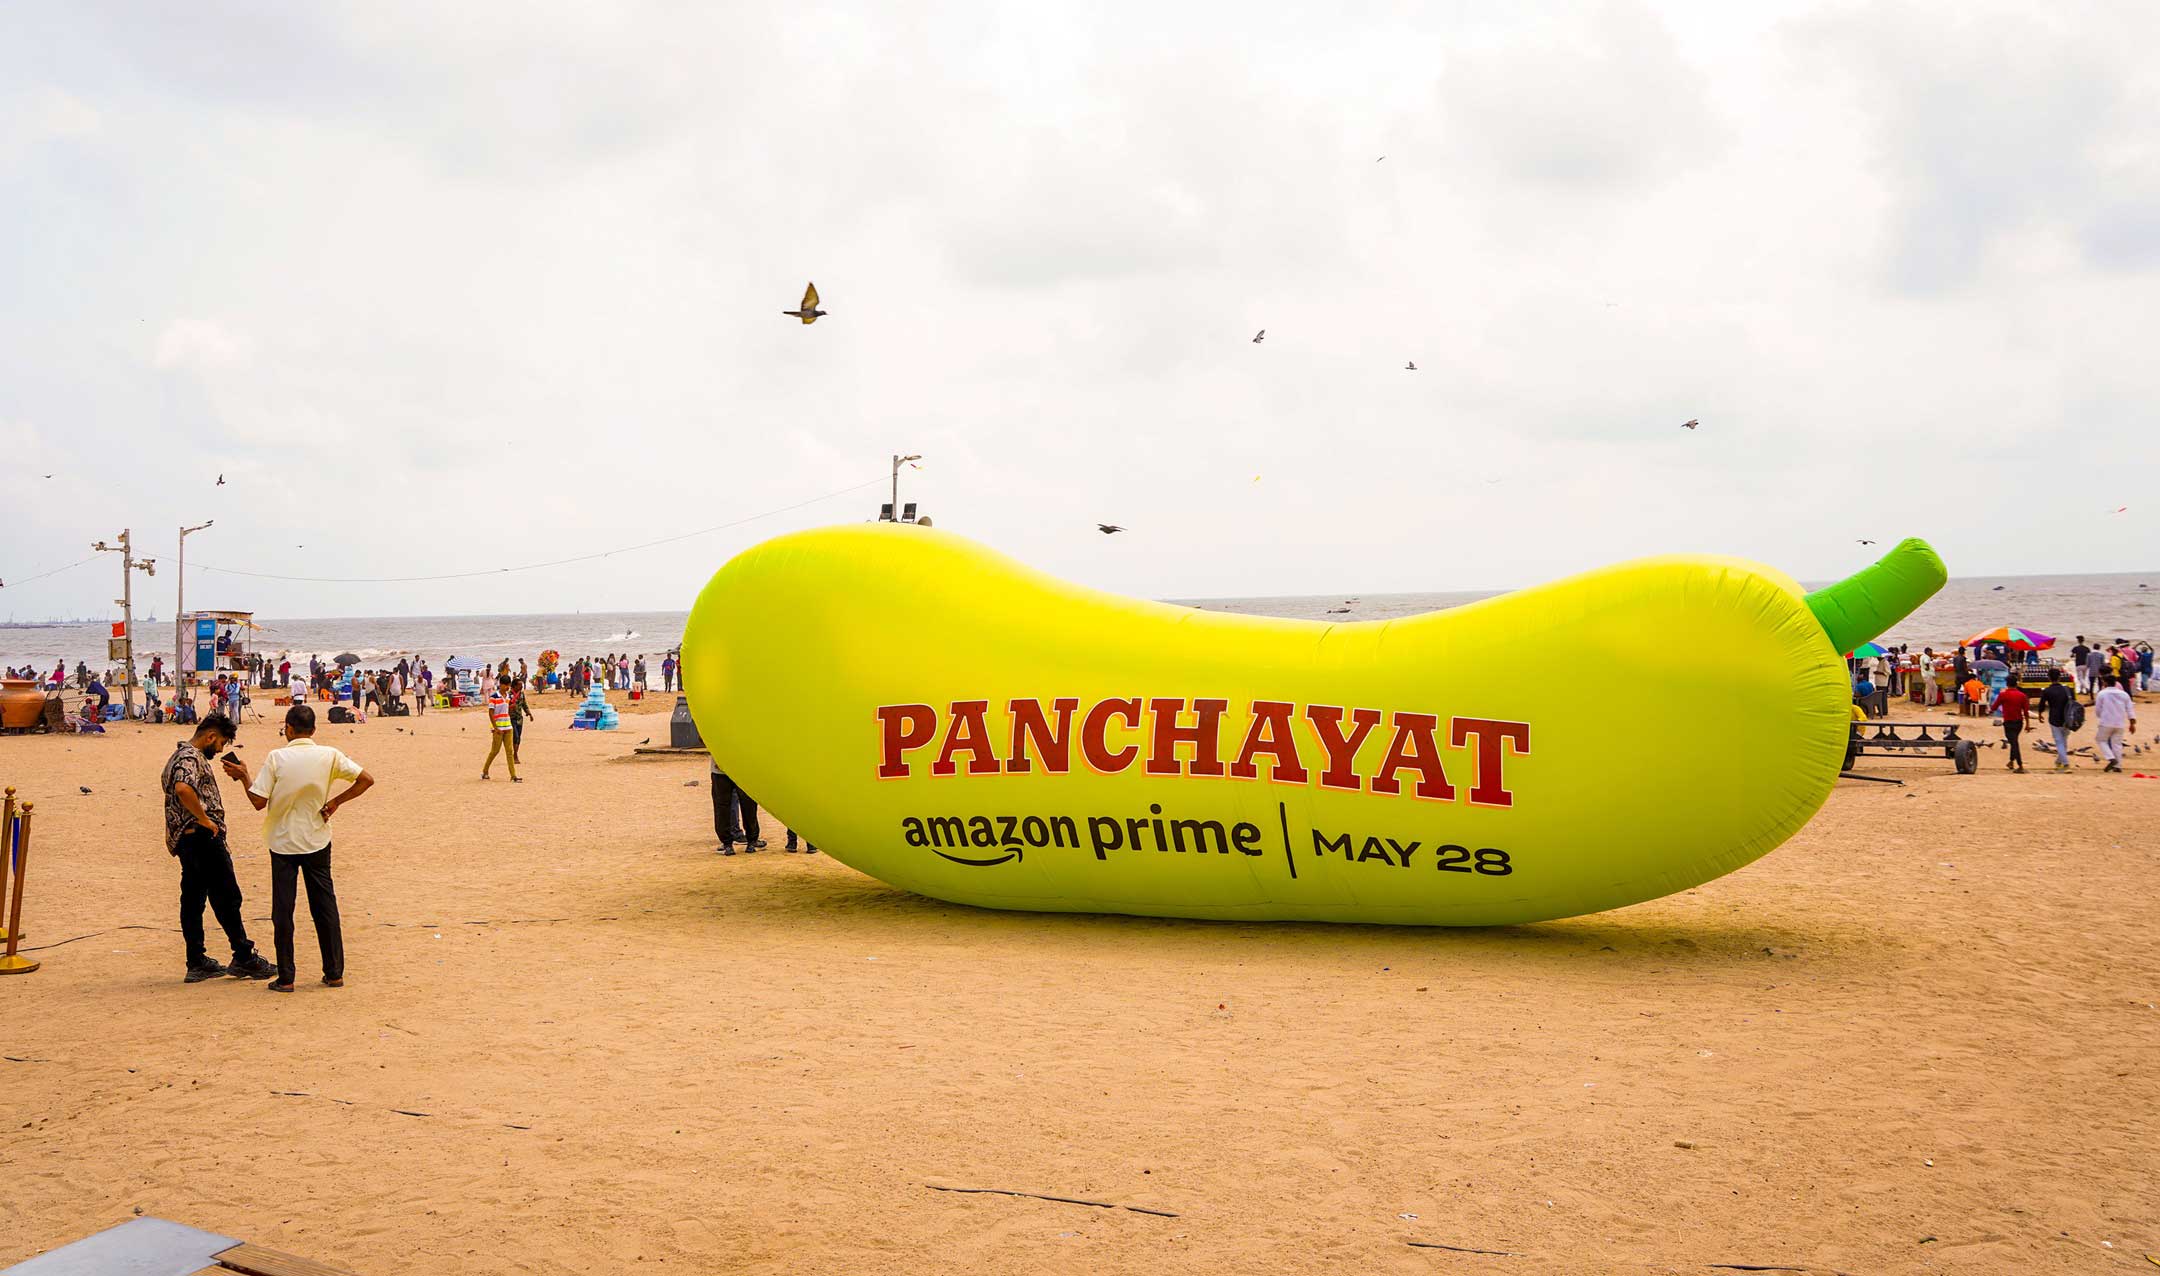 Prime Video's unique marketing for Panchayat Season 3 at Juhu Beach, featuring the iconic lauki inflatable.